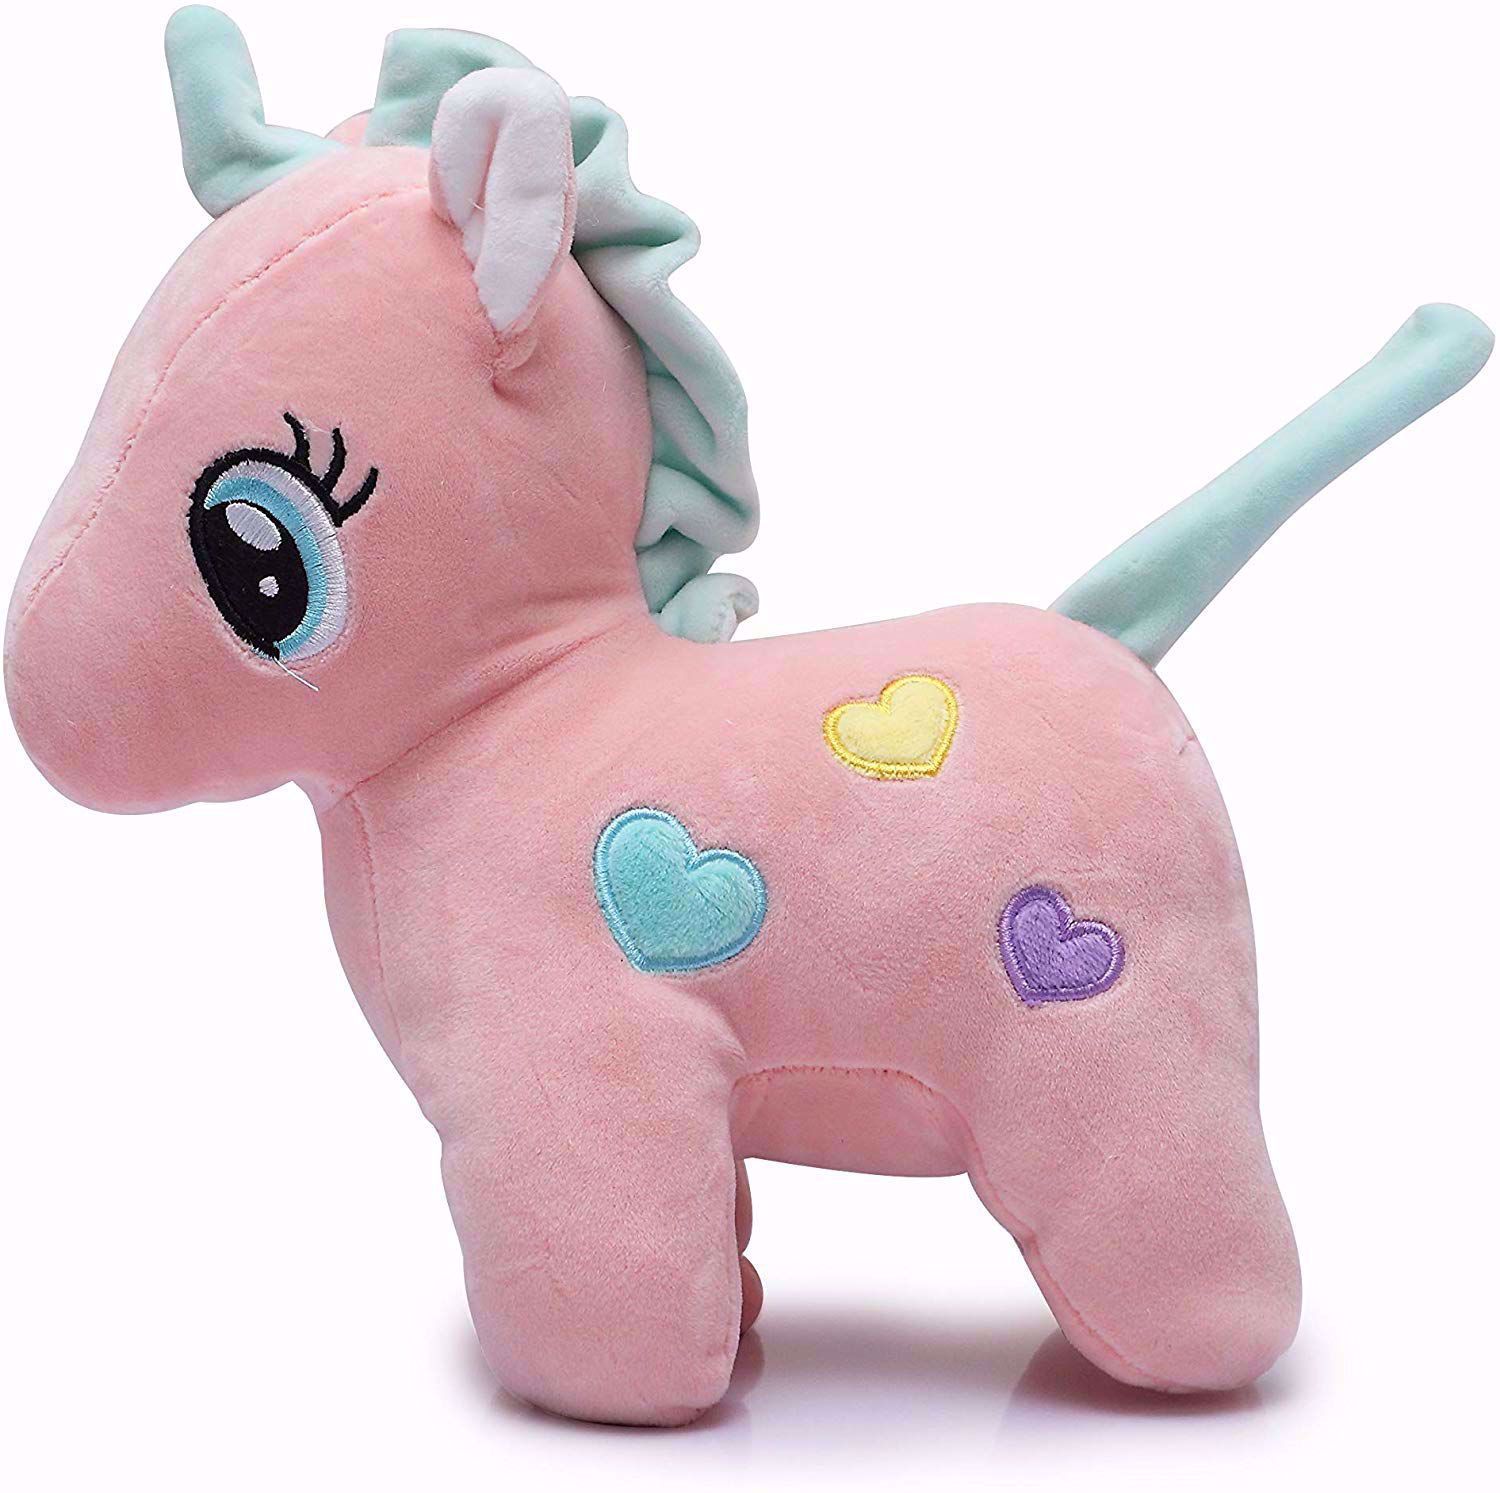 Unicorn Stuffed Toy | Unicorn Stuff Toys | Pink Unicorn Stuffed Animal-Buy  Baby Products| Online India at Best Price | Buy Baby Care Products At Low  Pricing |